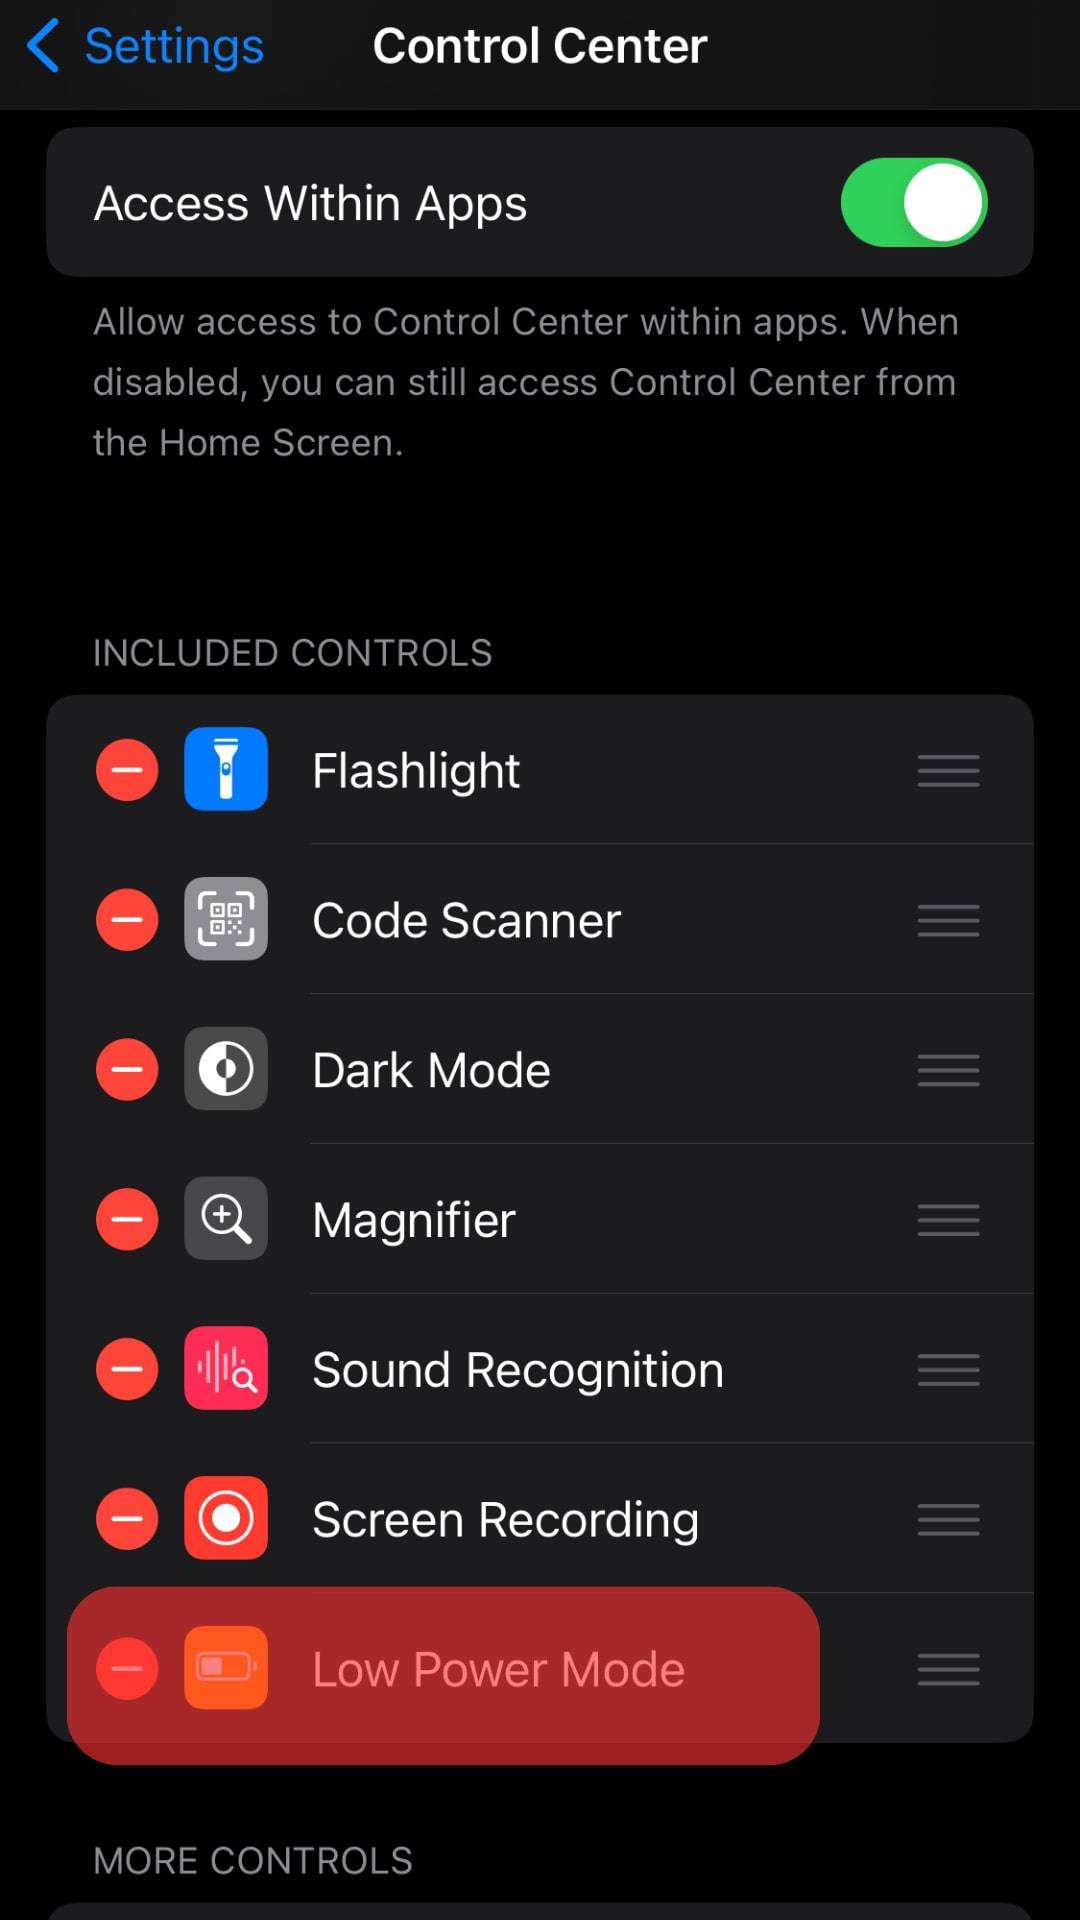 Add Low Power Mode To Included Controls.